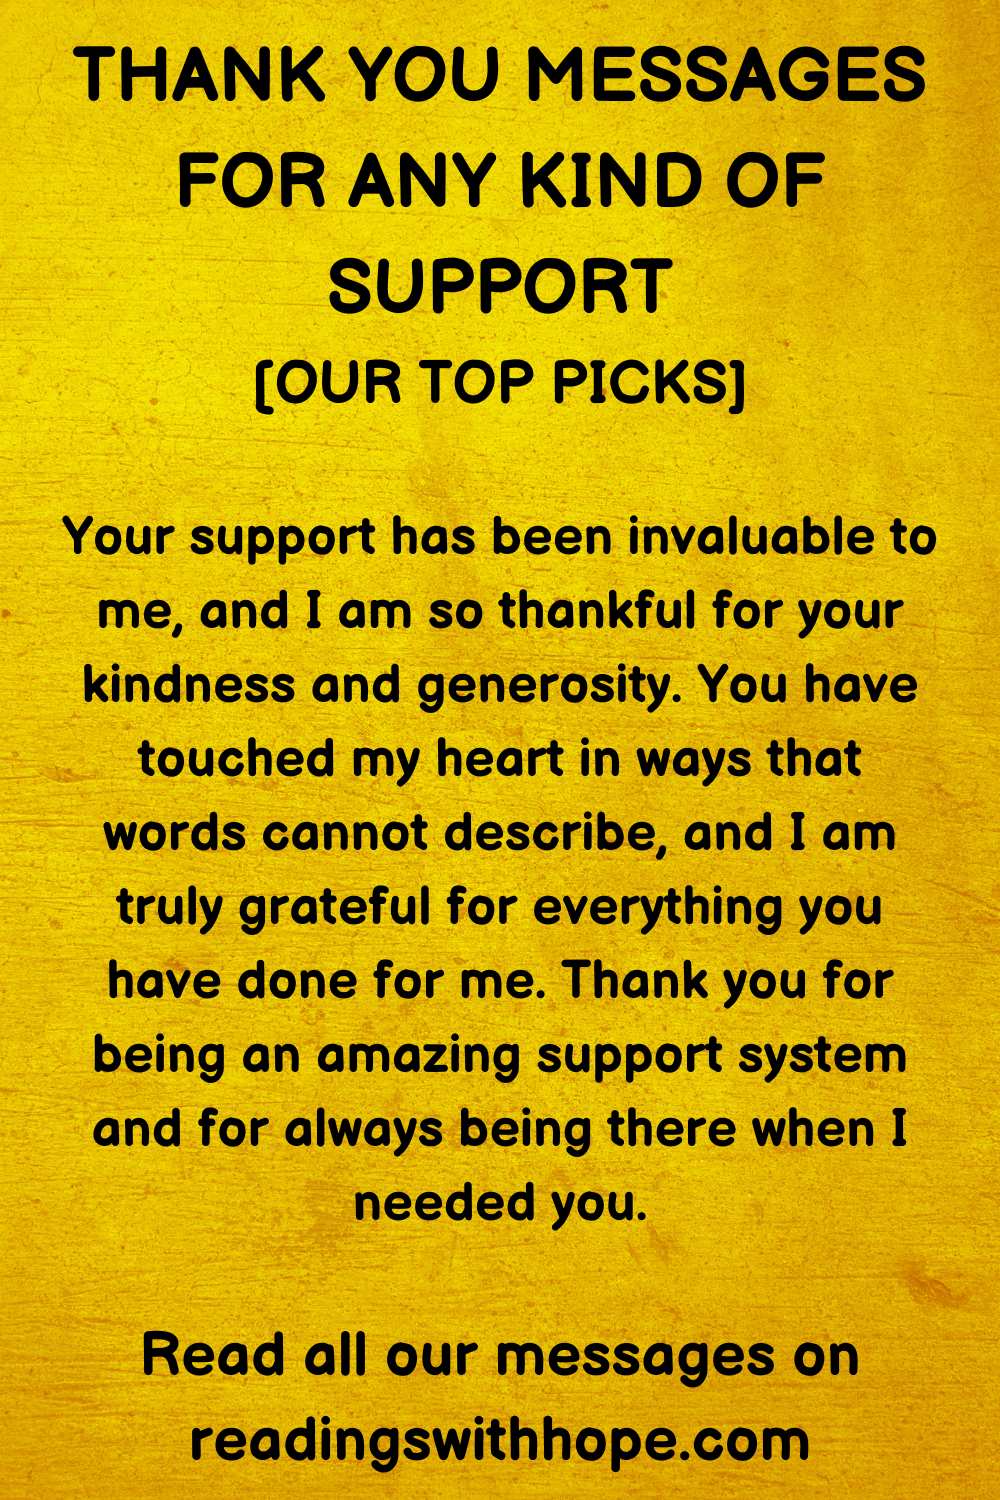 Thank You Message For Any Kind of Support
